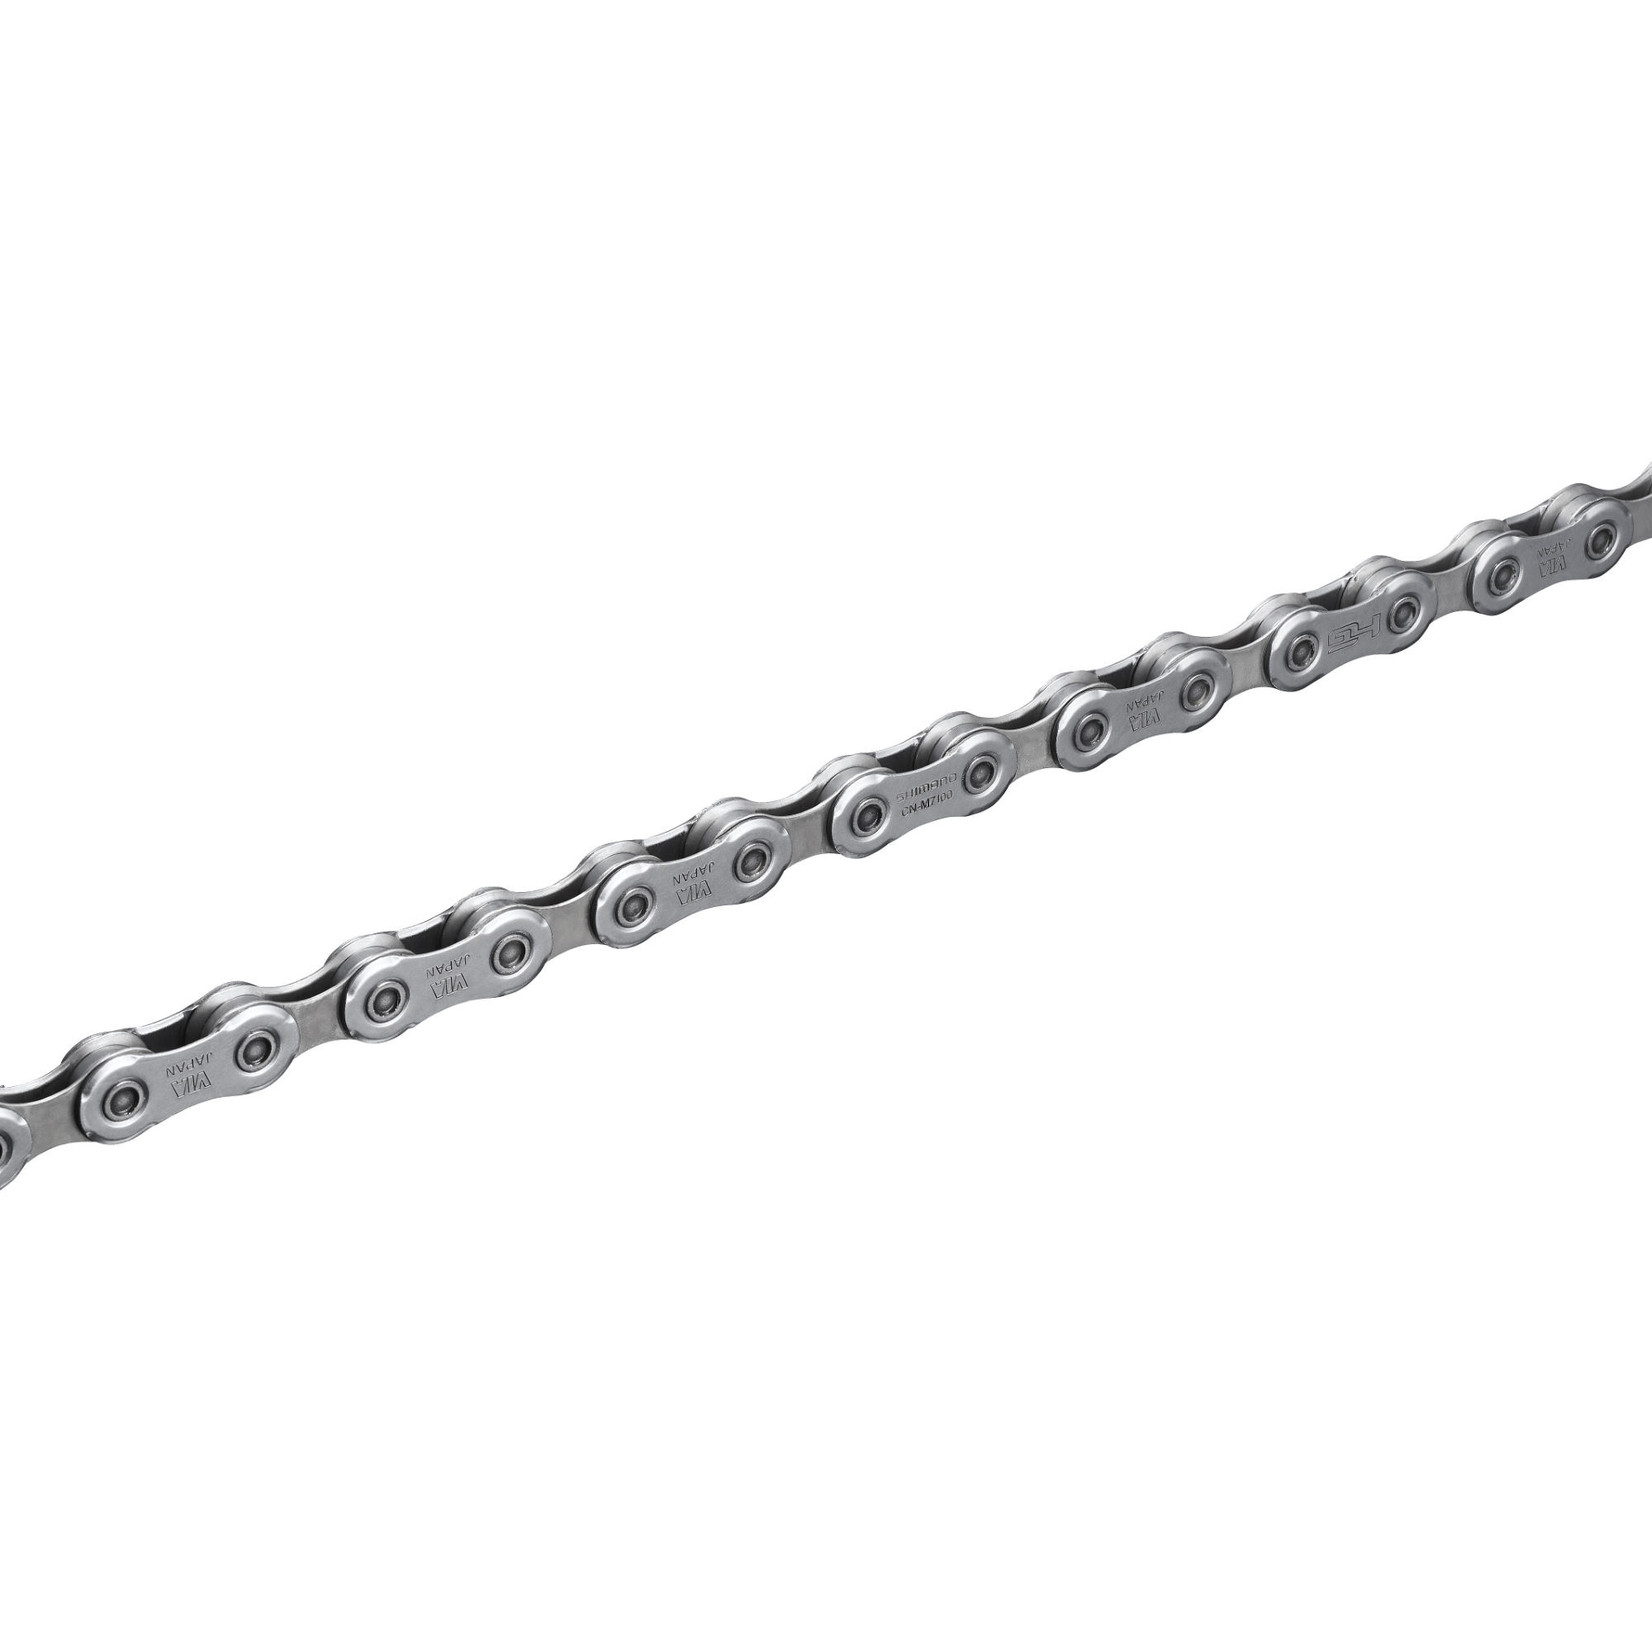 Shimano SLX Shimano CN-M7100 SLX/Road chain with quick link, 12-speed, 126L